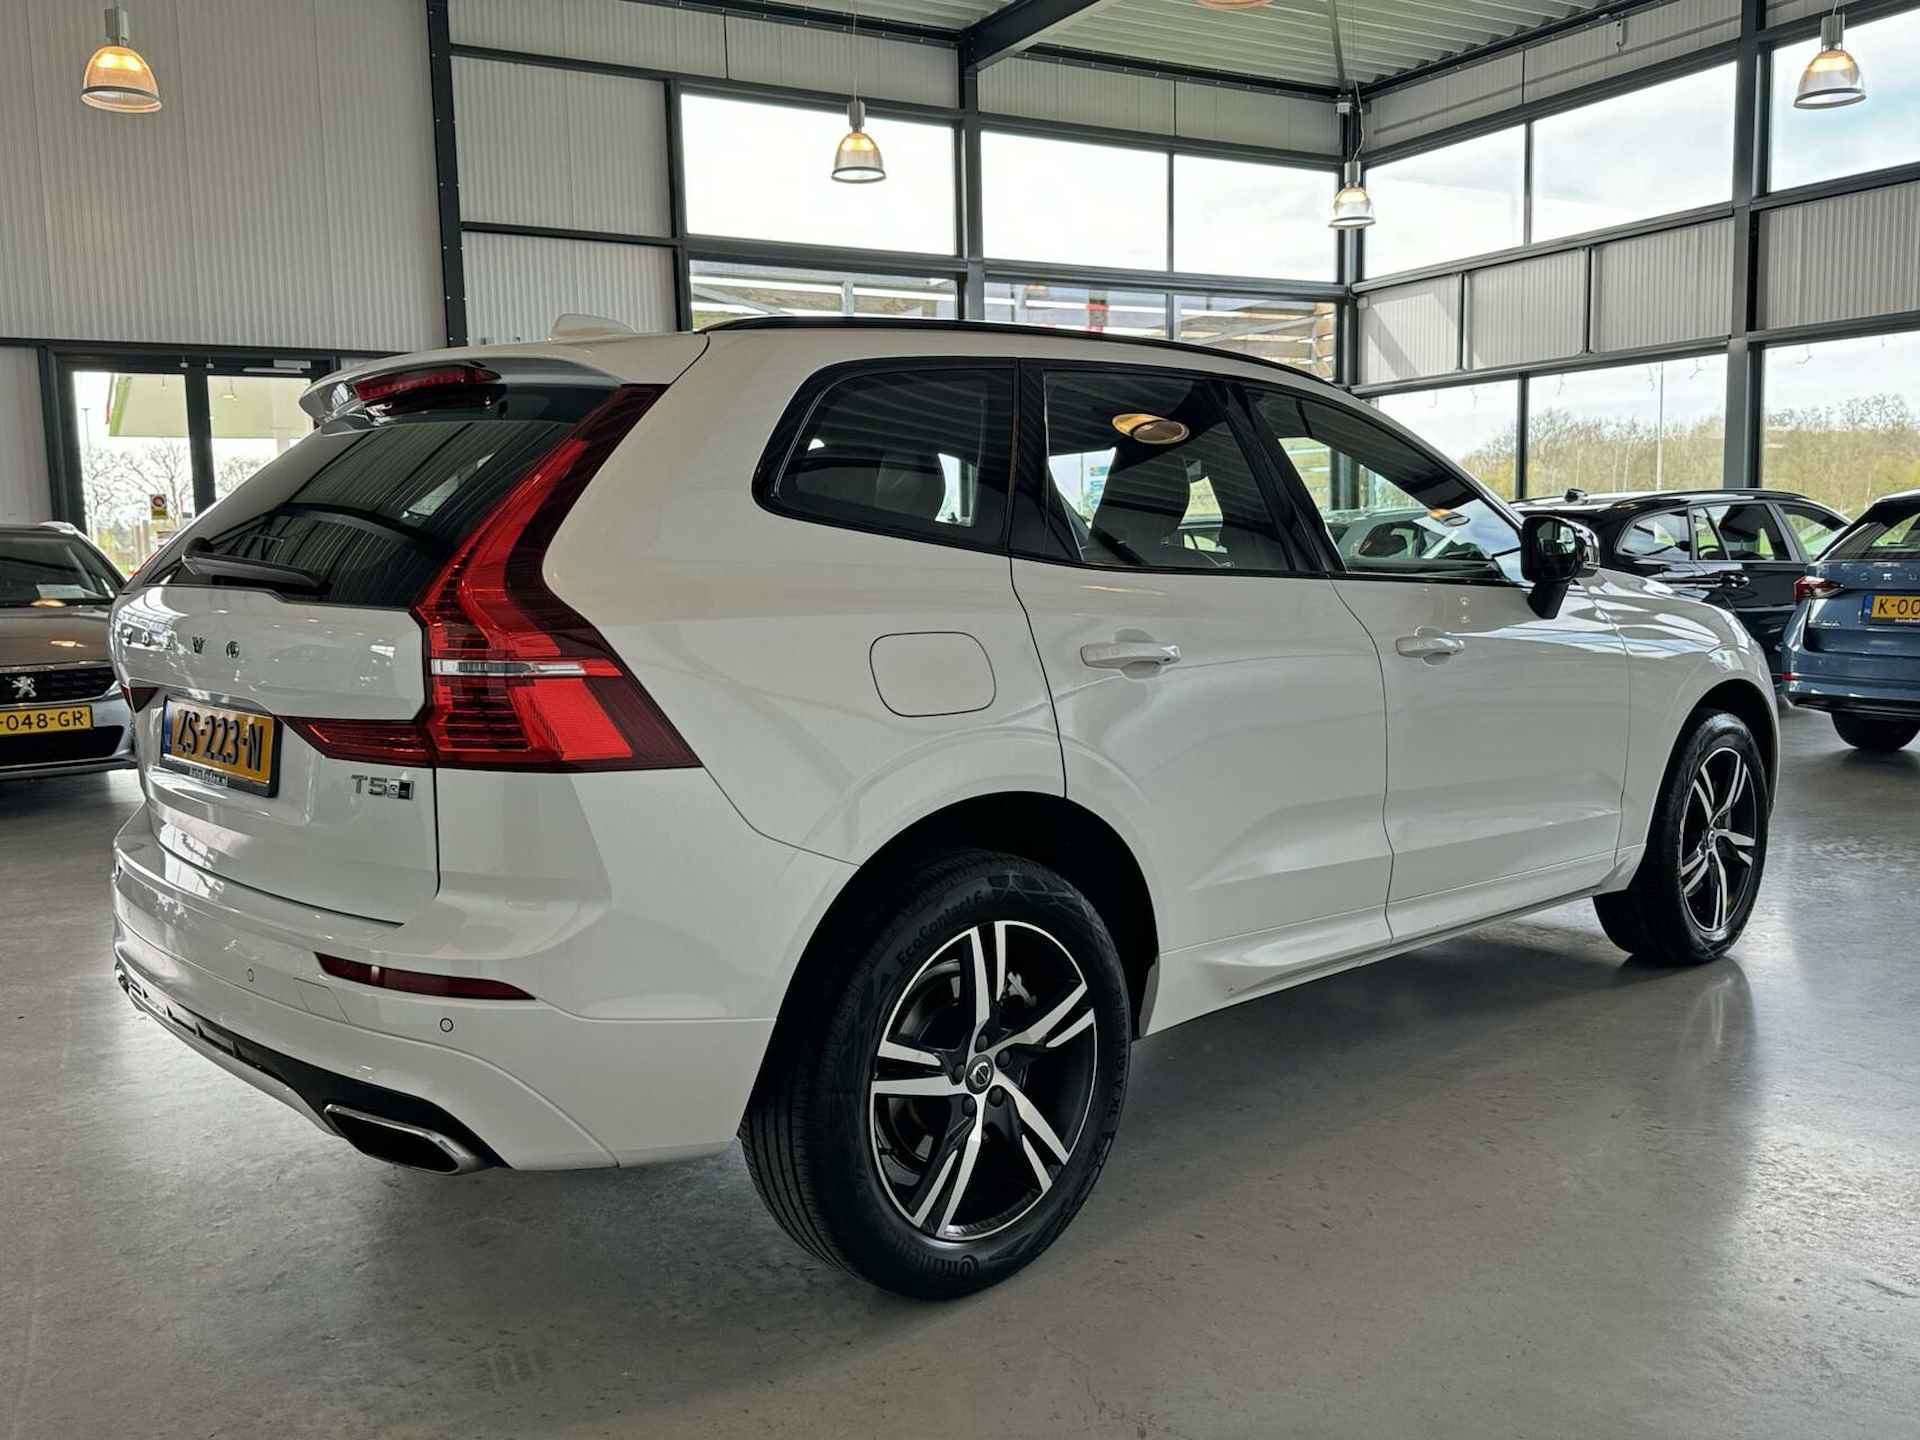 Volvo XC60 2.0 T5 184Kw AWD R-Design Geartronic Inscription Plus|Luchtvering - 13/44